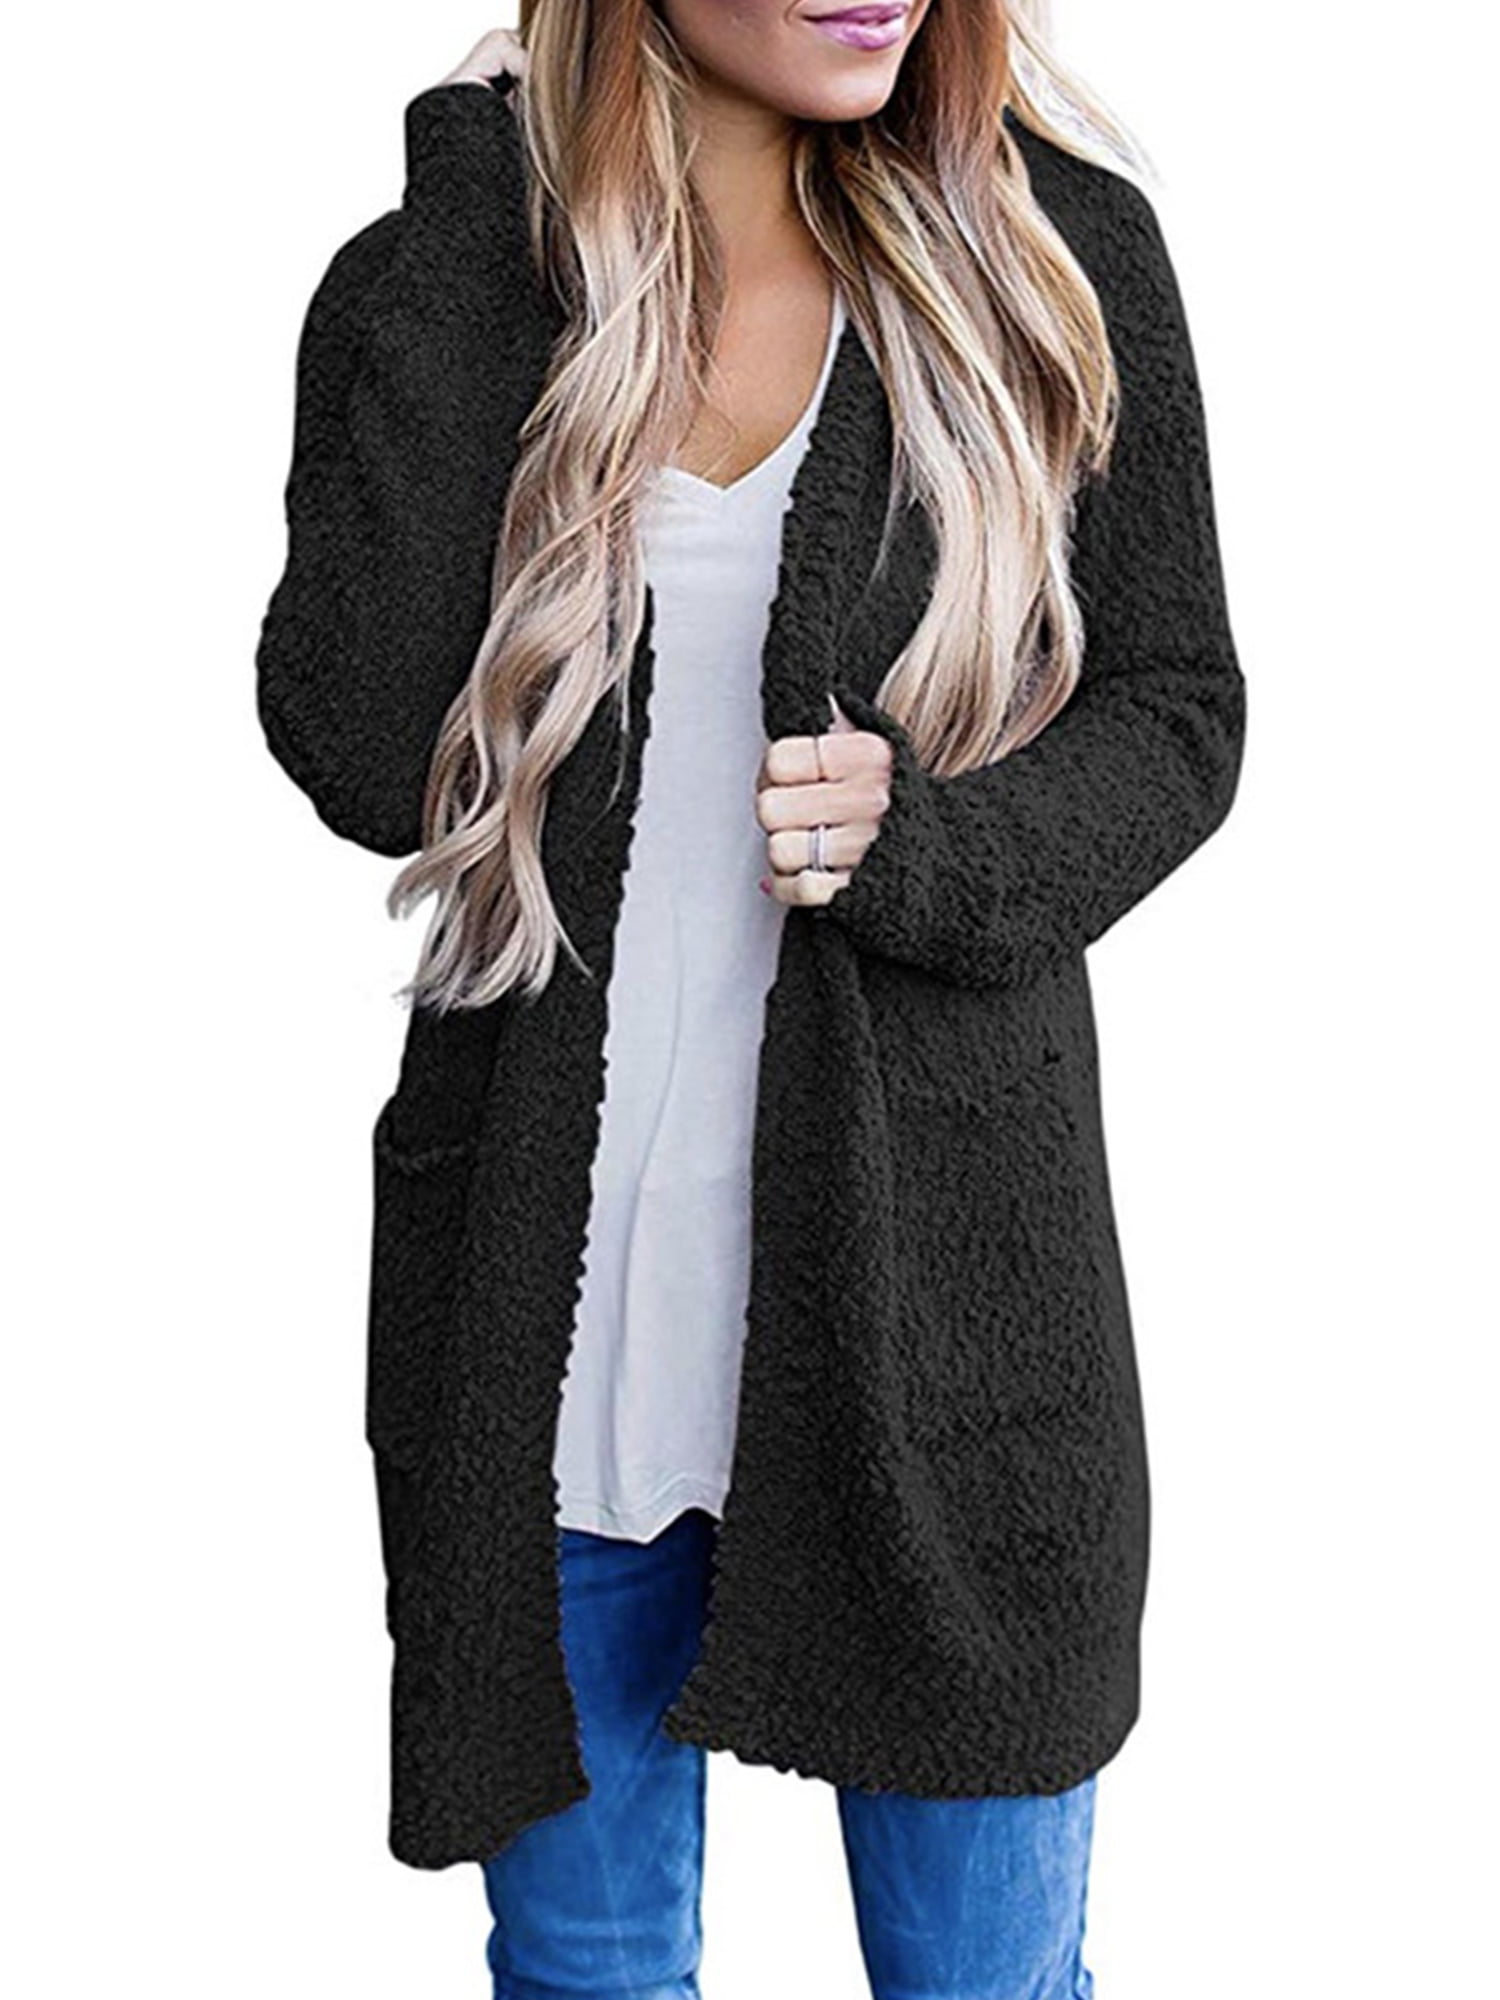 Asvivid Popcorn Open Front Fall Cardigans for Women Oversized Loose Long Sweater Coat Outwear with Pocket 